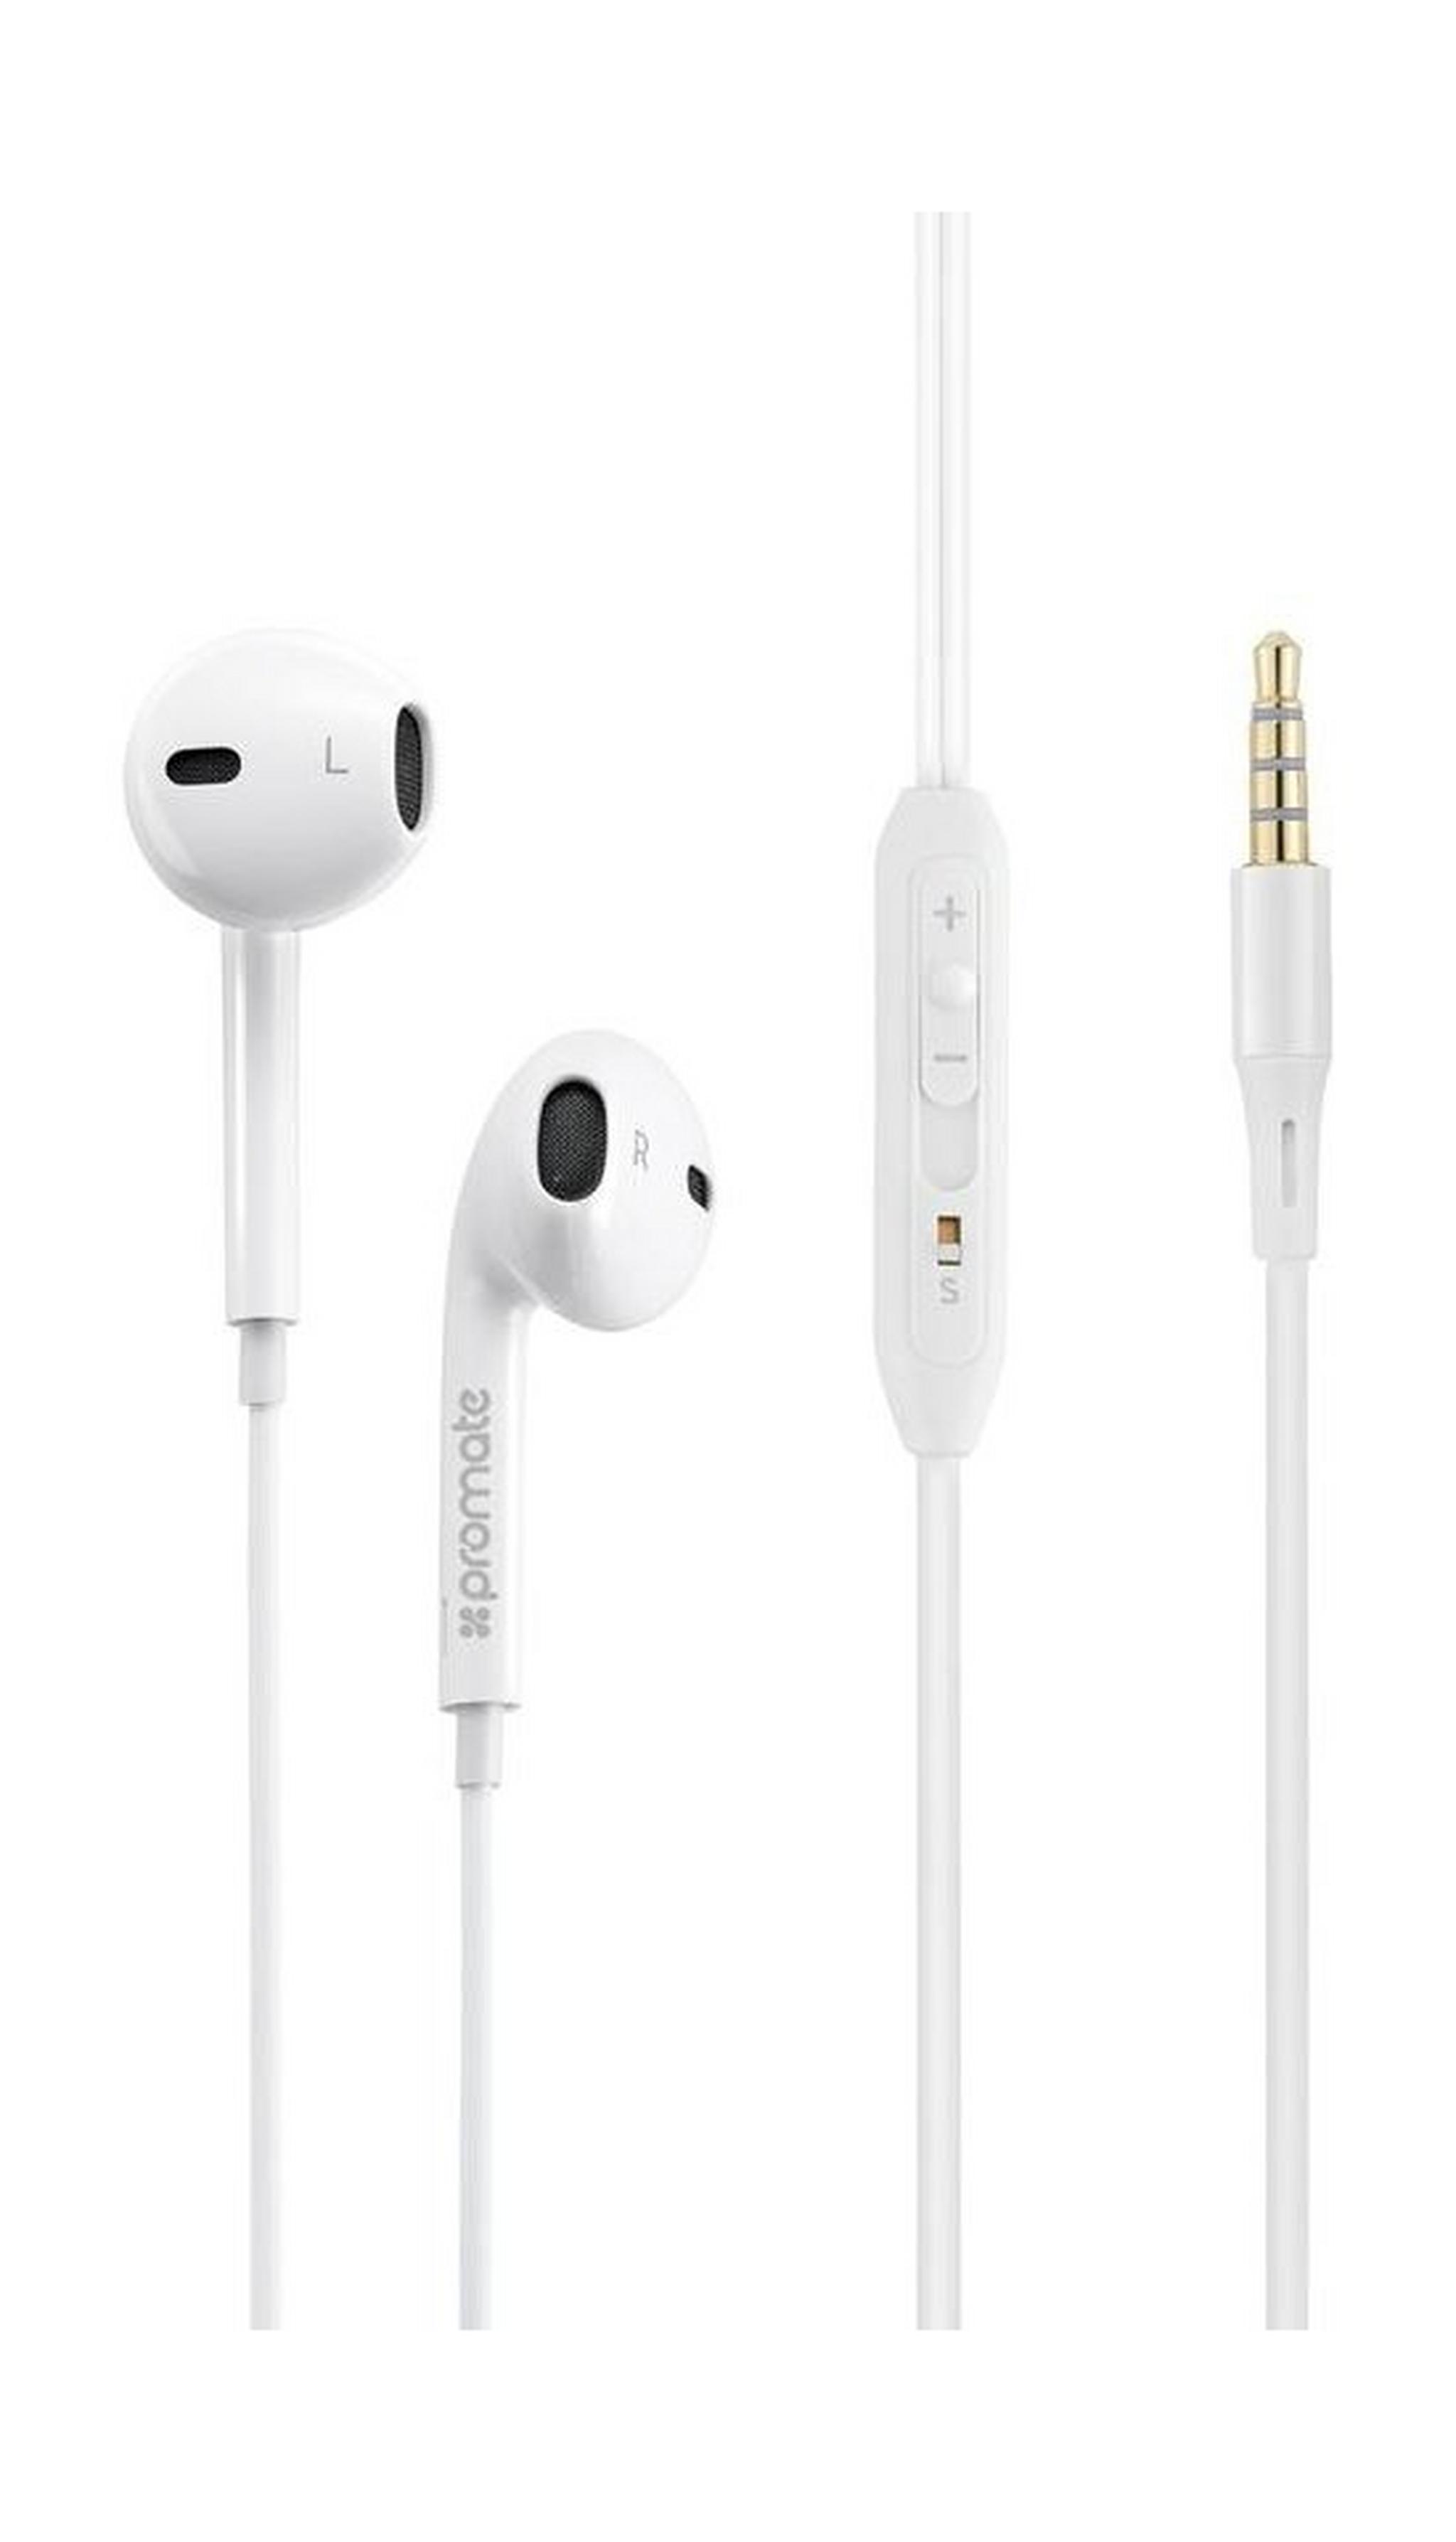 Promate GearPod-IS2 Lightweight High-Performance Stereo Earbuds - White